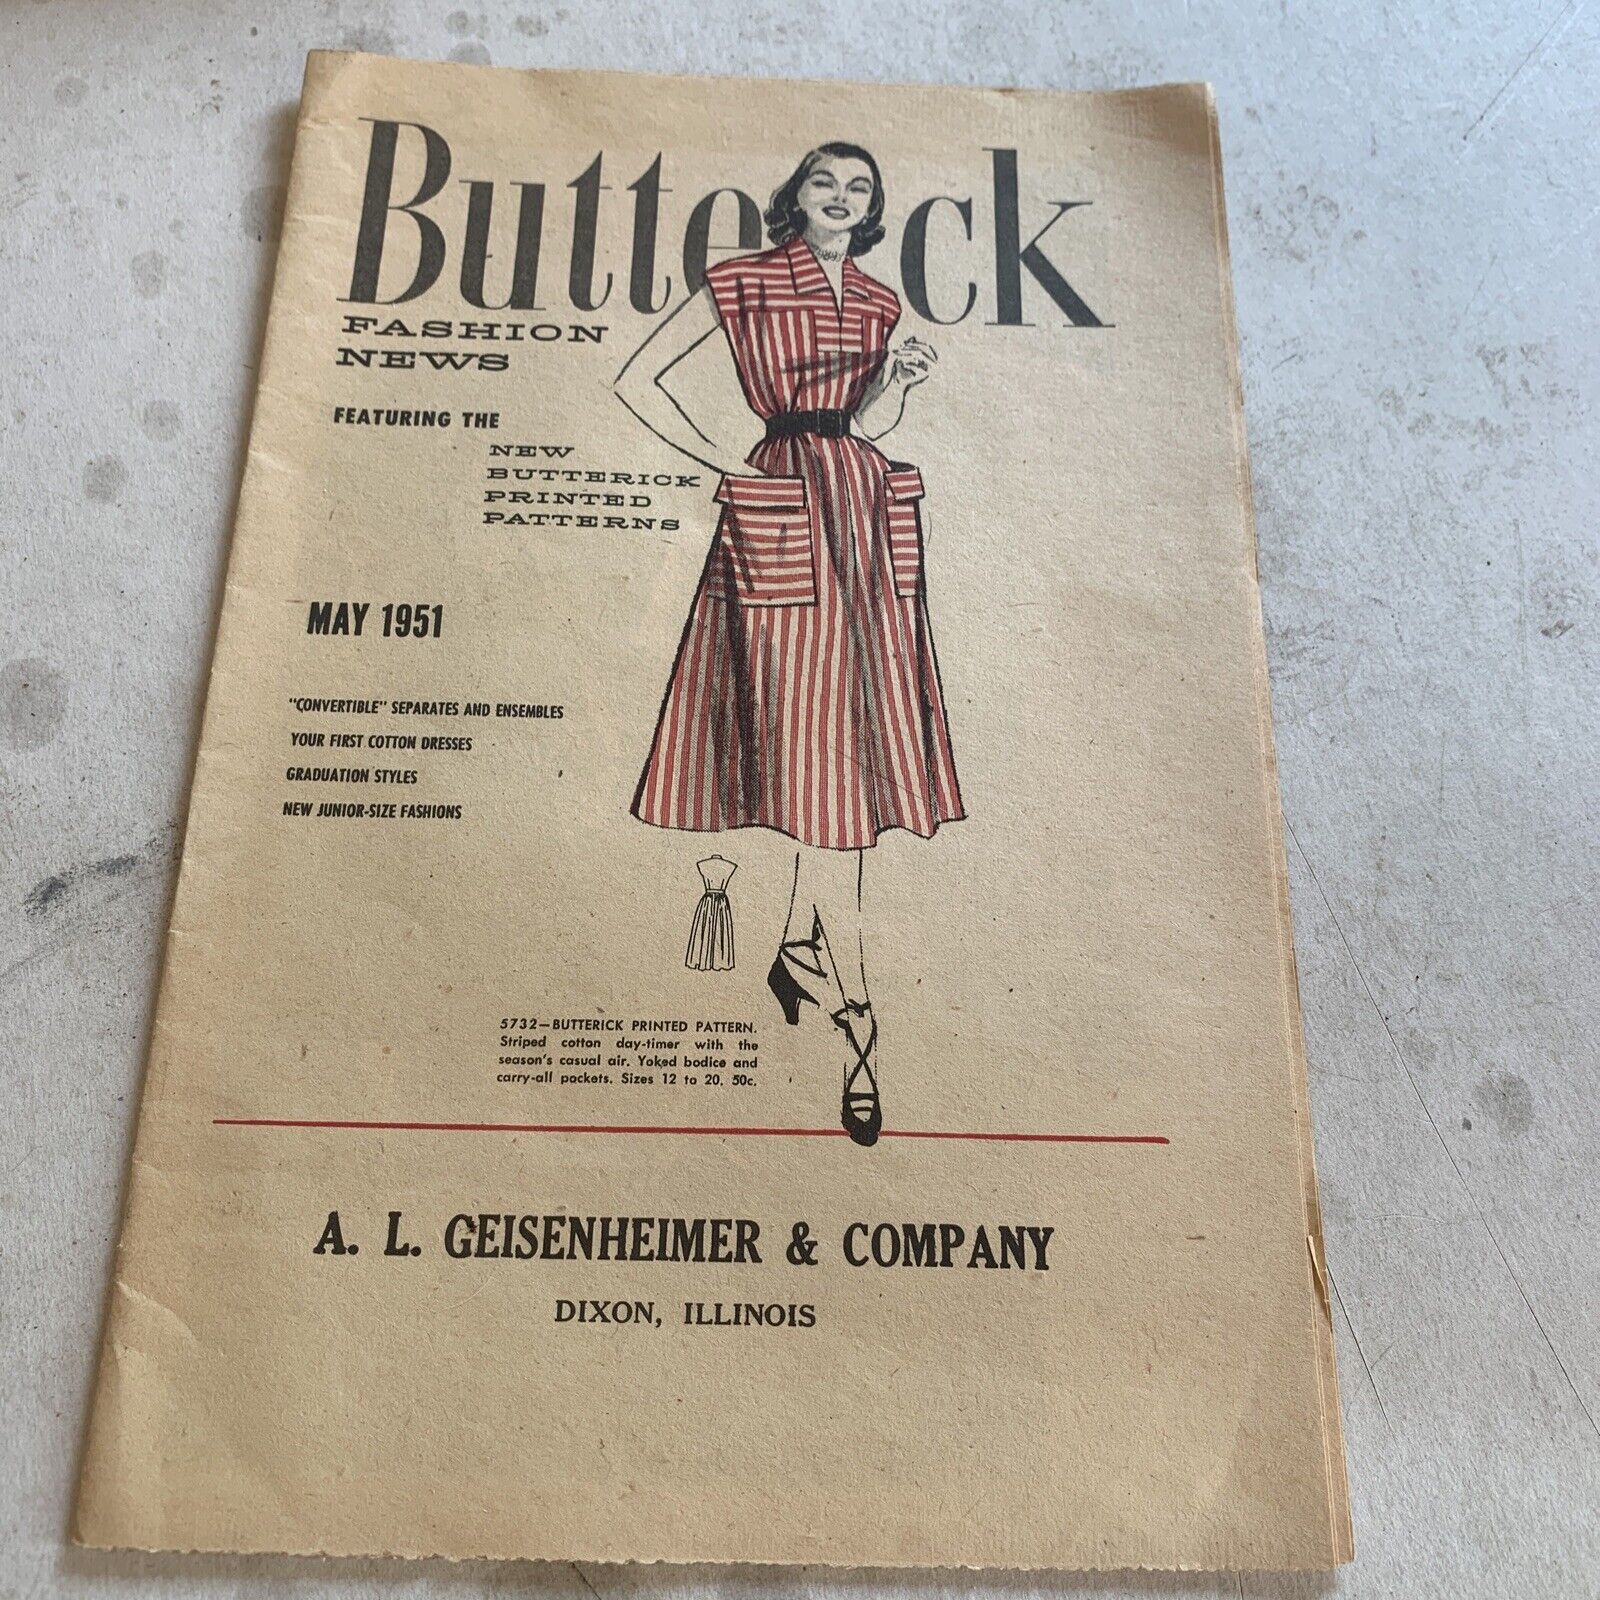 Butterick Fashion News May 1951. Excellent Condition. Dixon Illinois